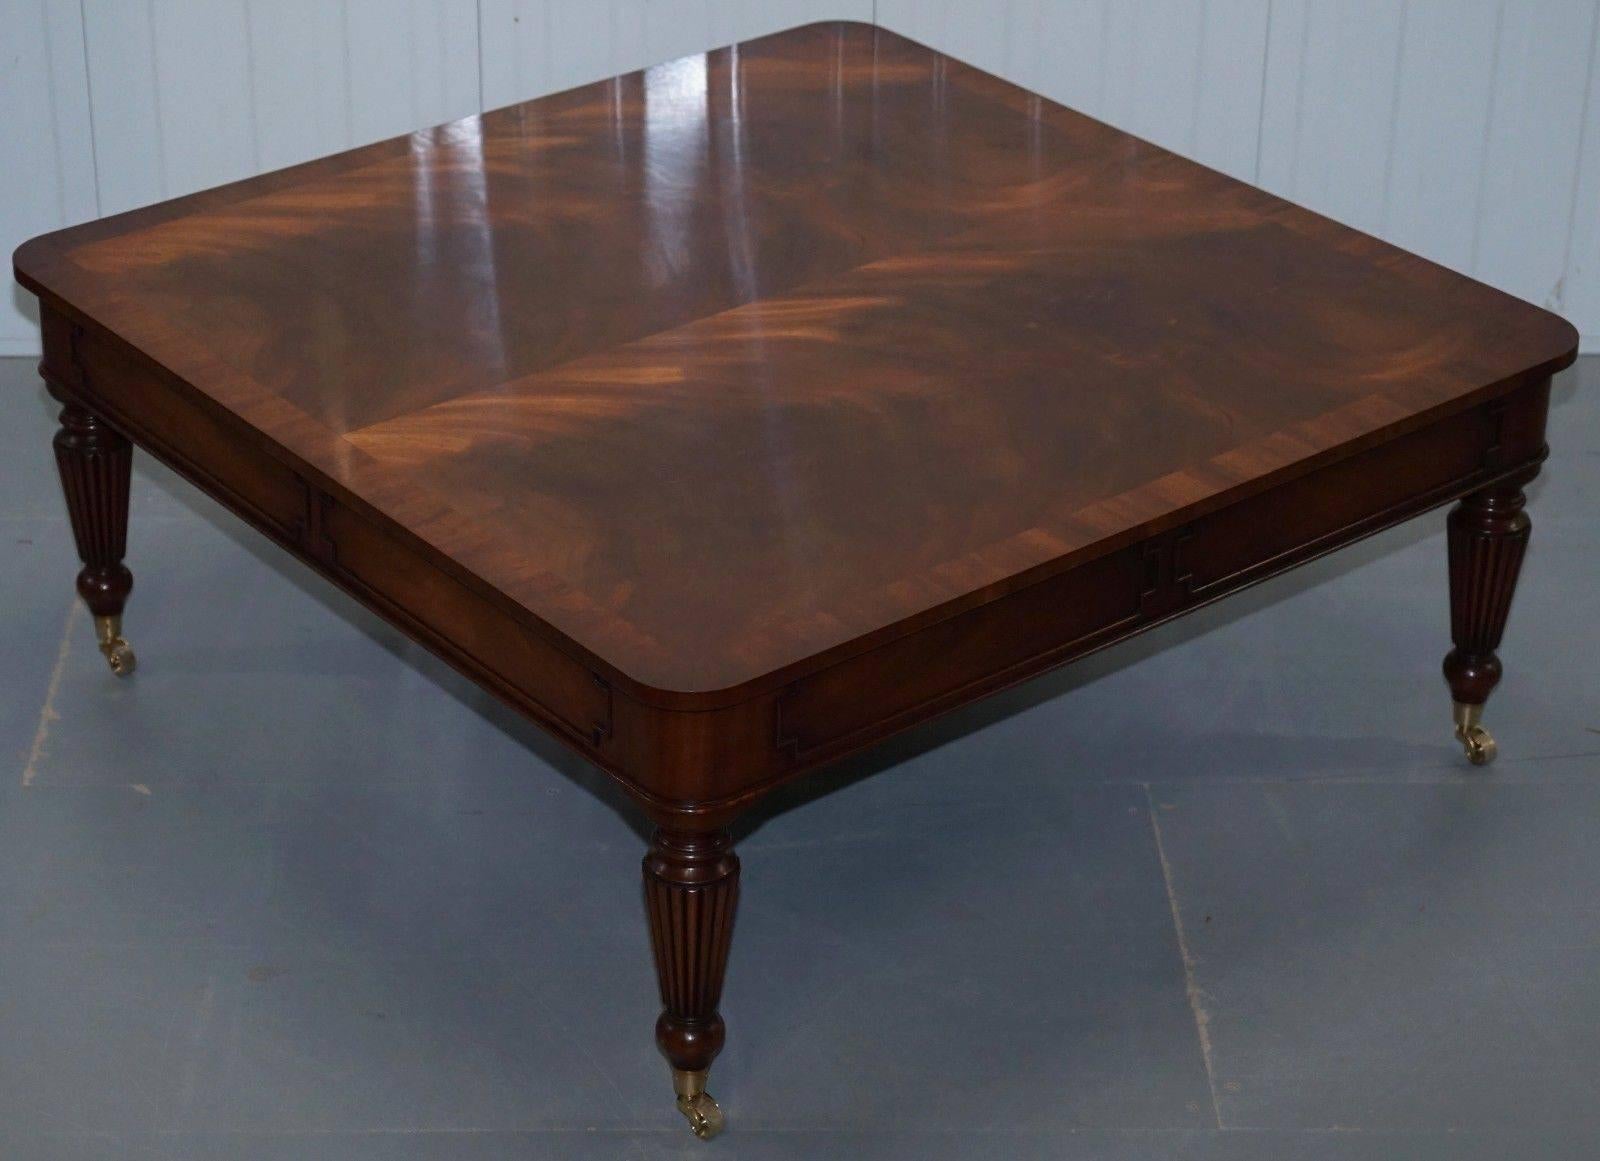 We are delighted to offer for sale this absolutely stunning twin drawers flamed mahogany coffee table with Gillows style carved legs finished with brass castors

This table is pretty much the best looking piece of this type I have ever seen, it is